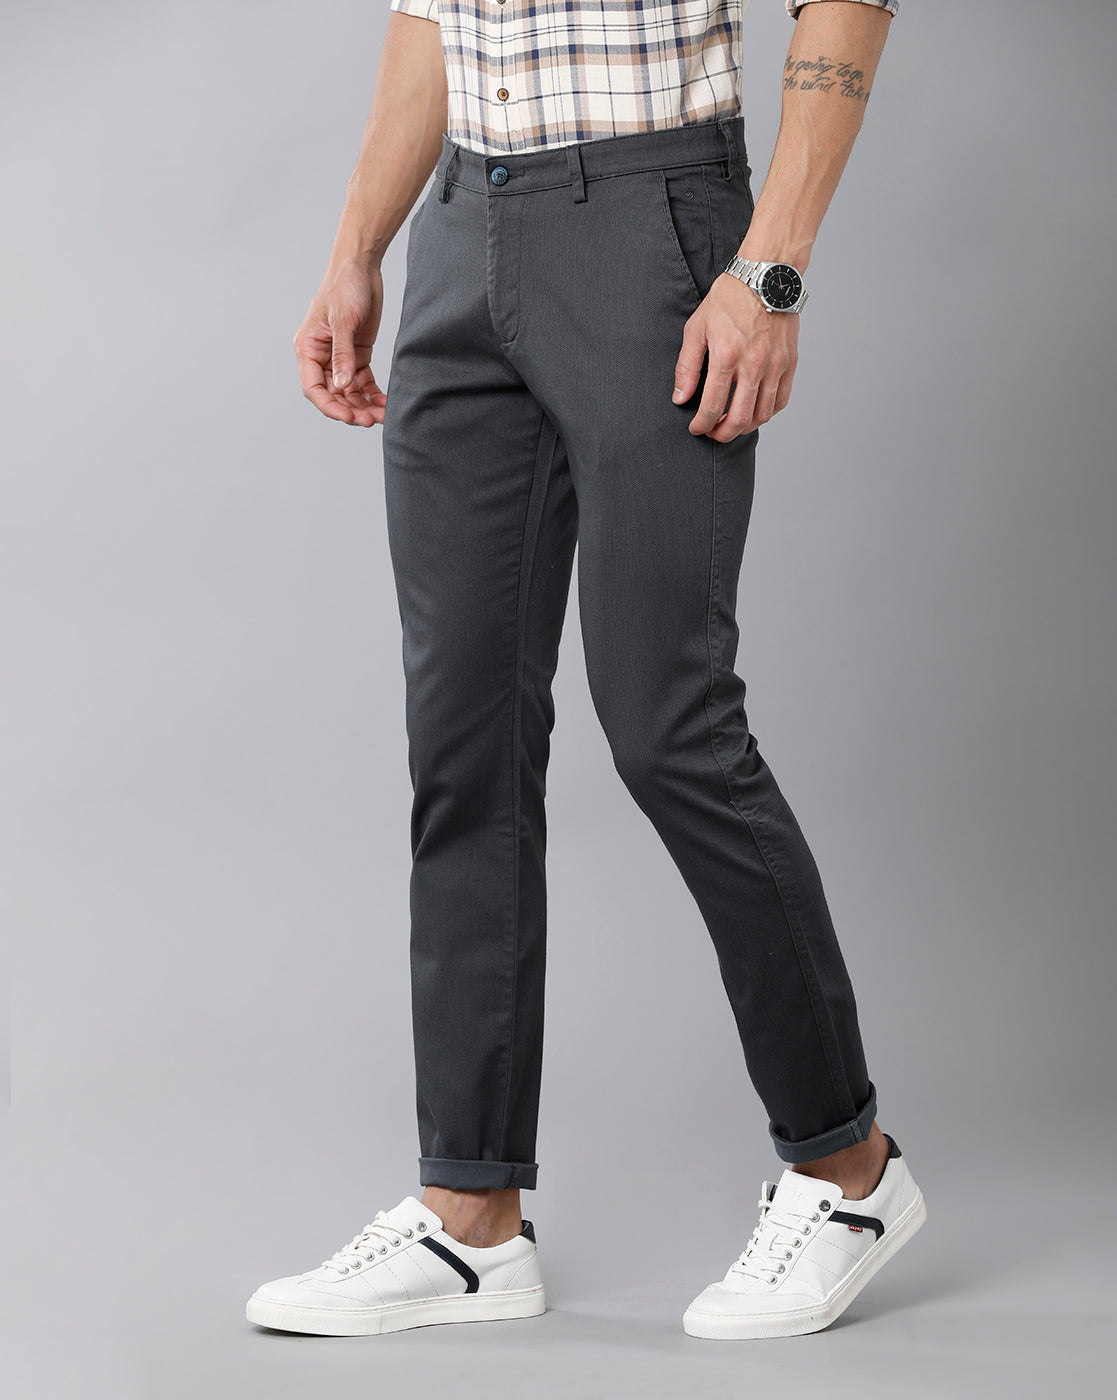 Track Pant  Dark Grey colour buy online from  ScholarShoppe